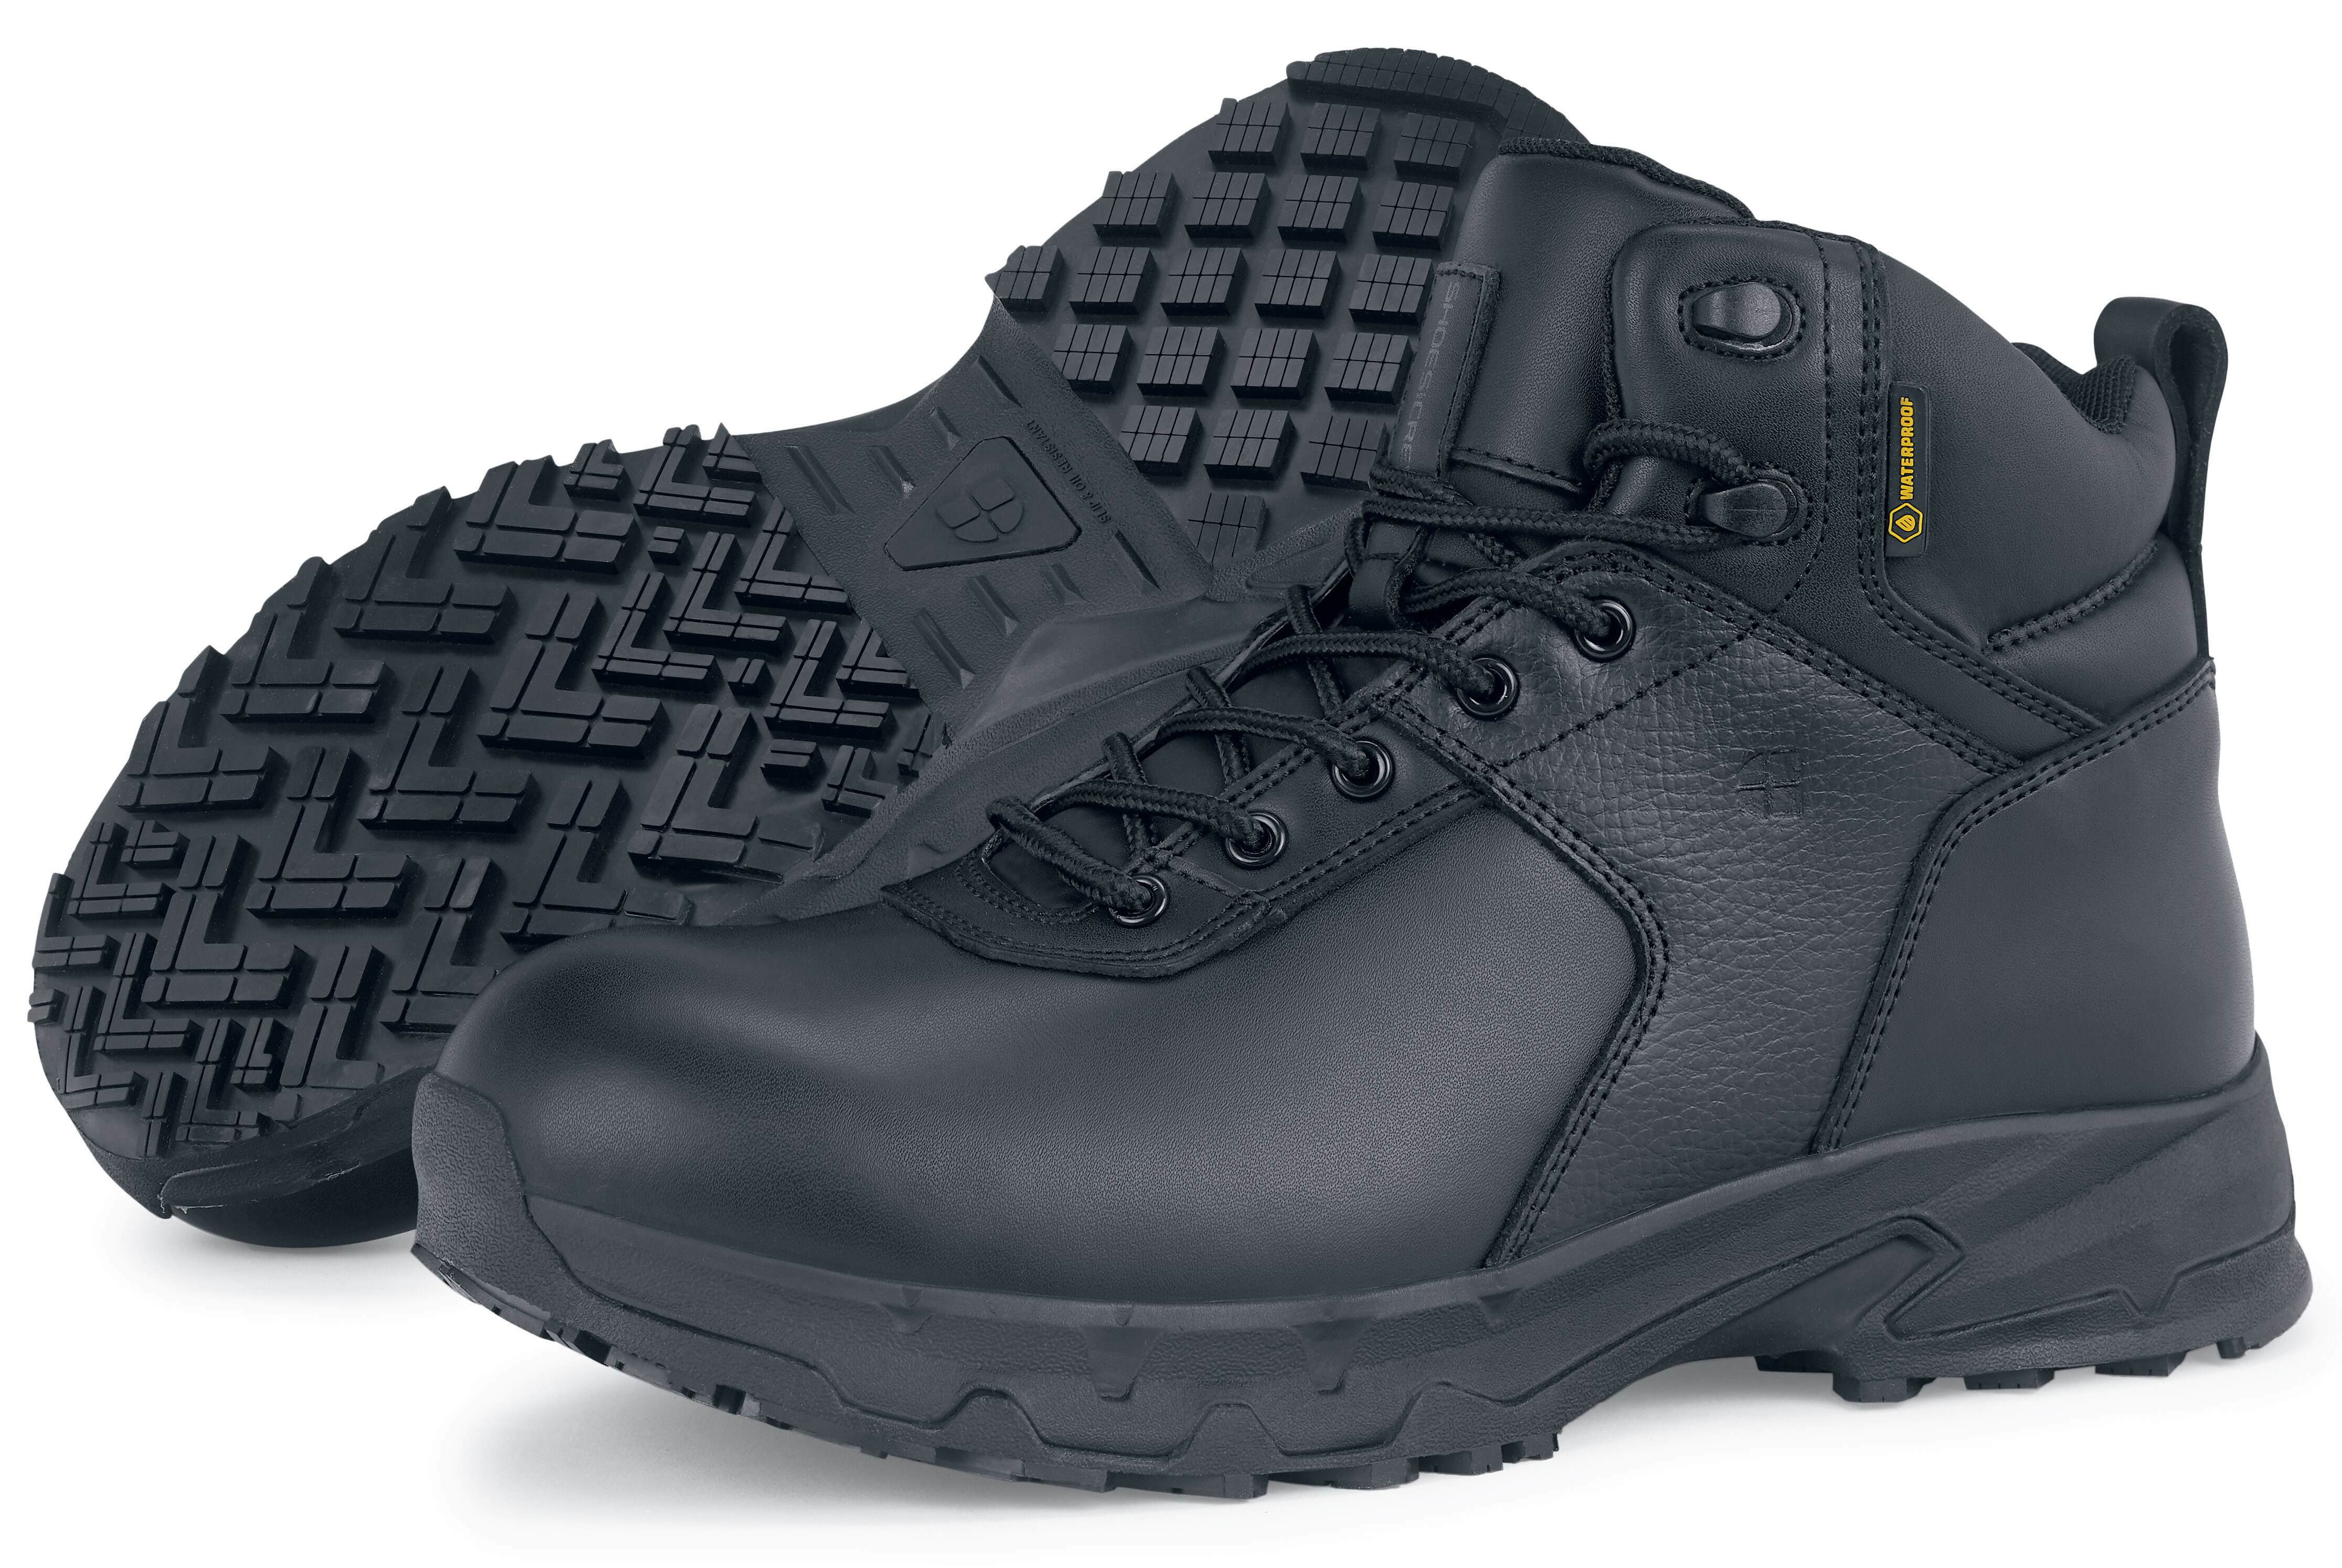 The Engineer IV CT from Shoes For Crews is an slip-resistant safety shoe designed to provide unbeatable comfort and protection throughout the working day, pair seen from the right and bottom.